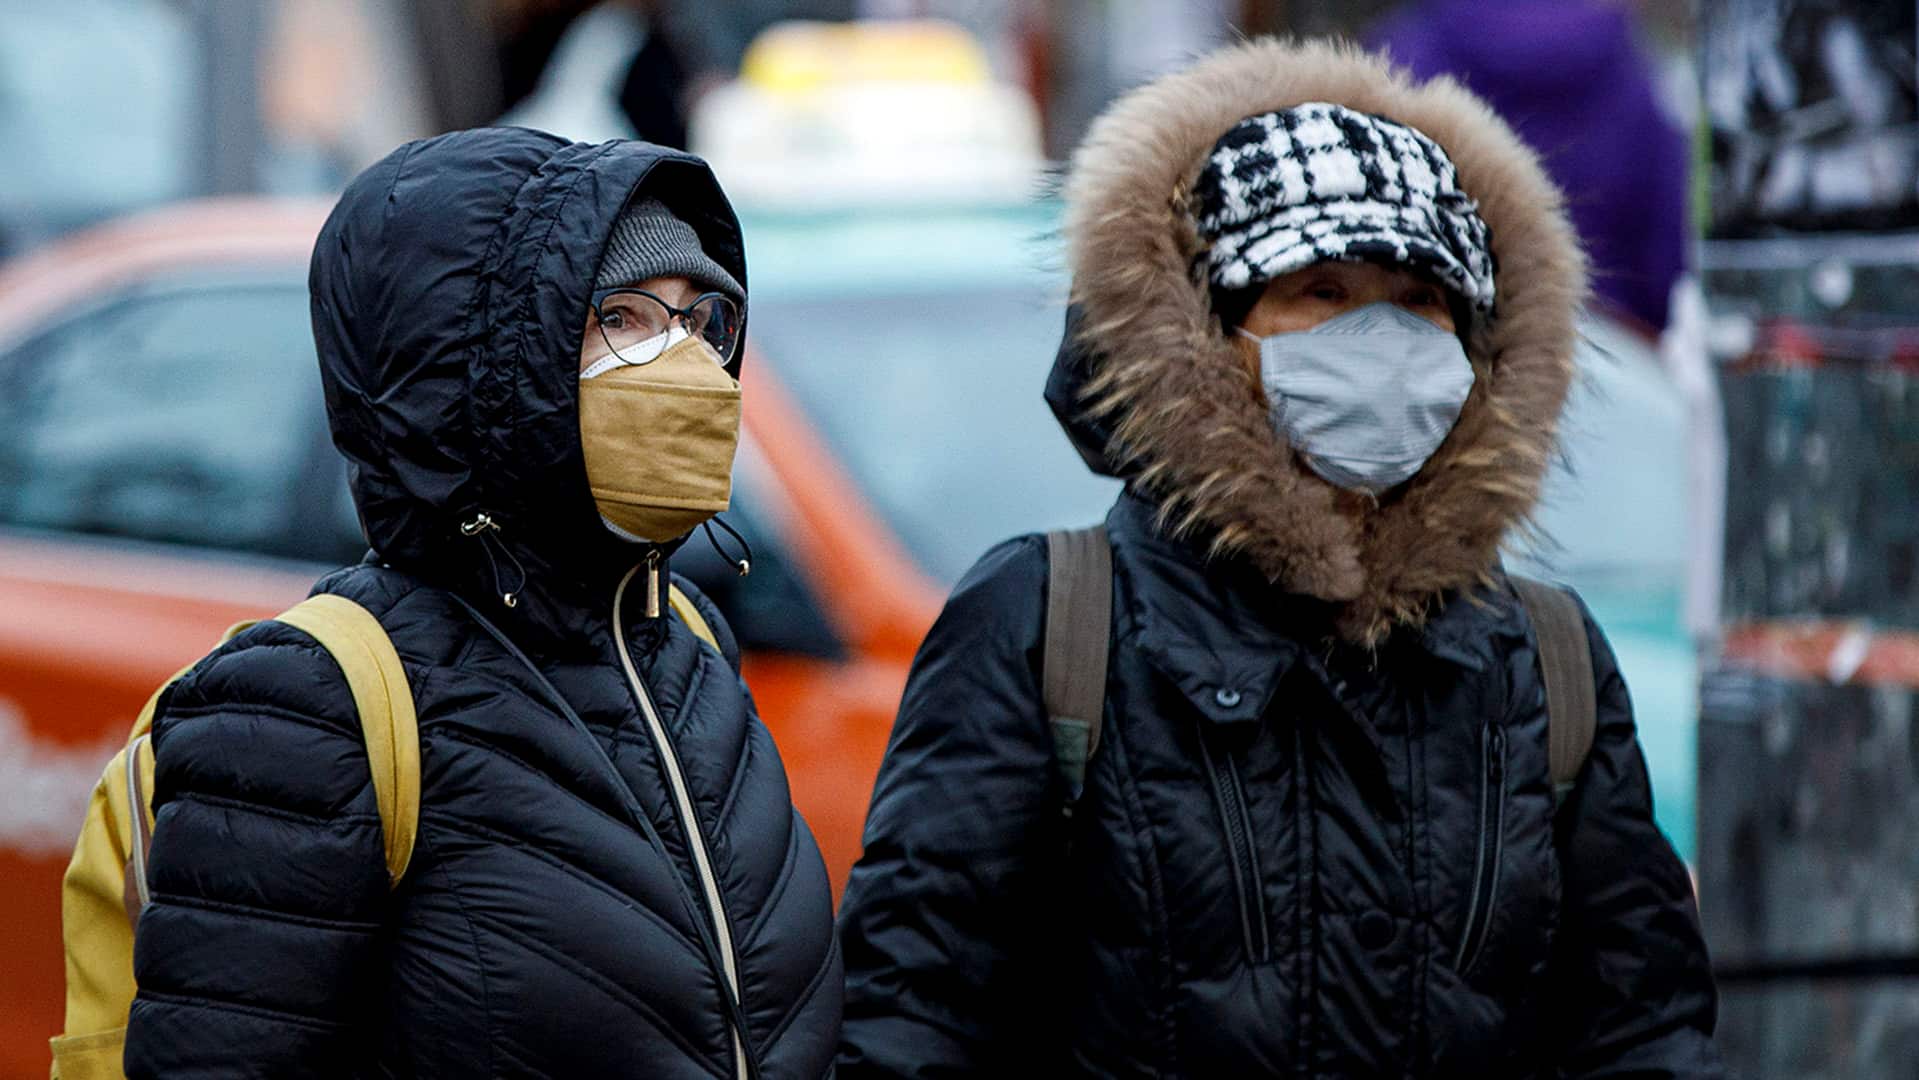 Masks likely aren't going anywhere in Canada — even as provinces ditch mandates